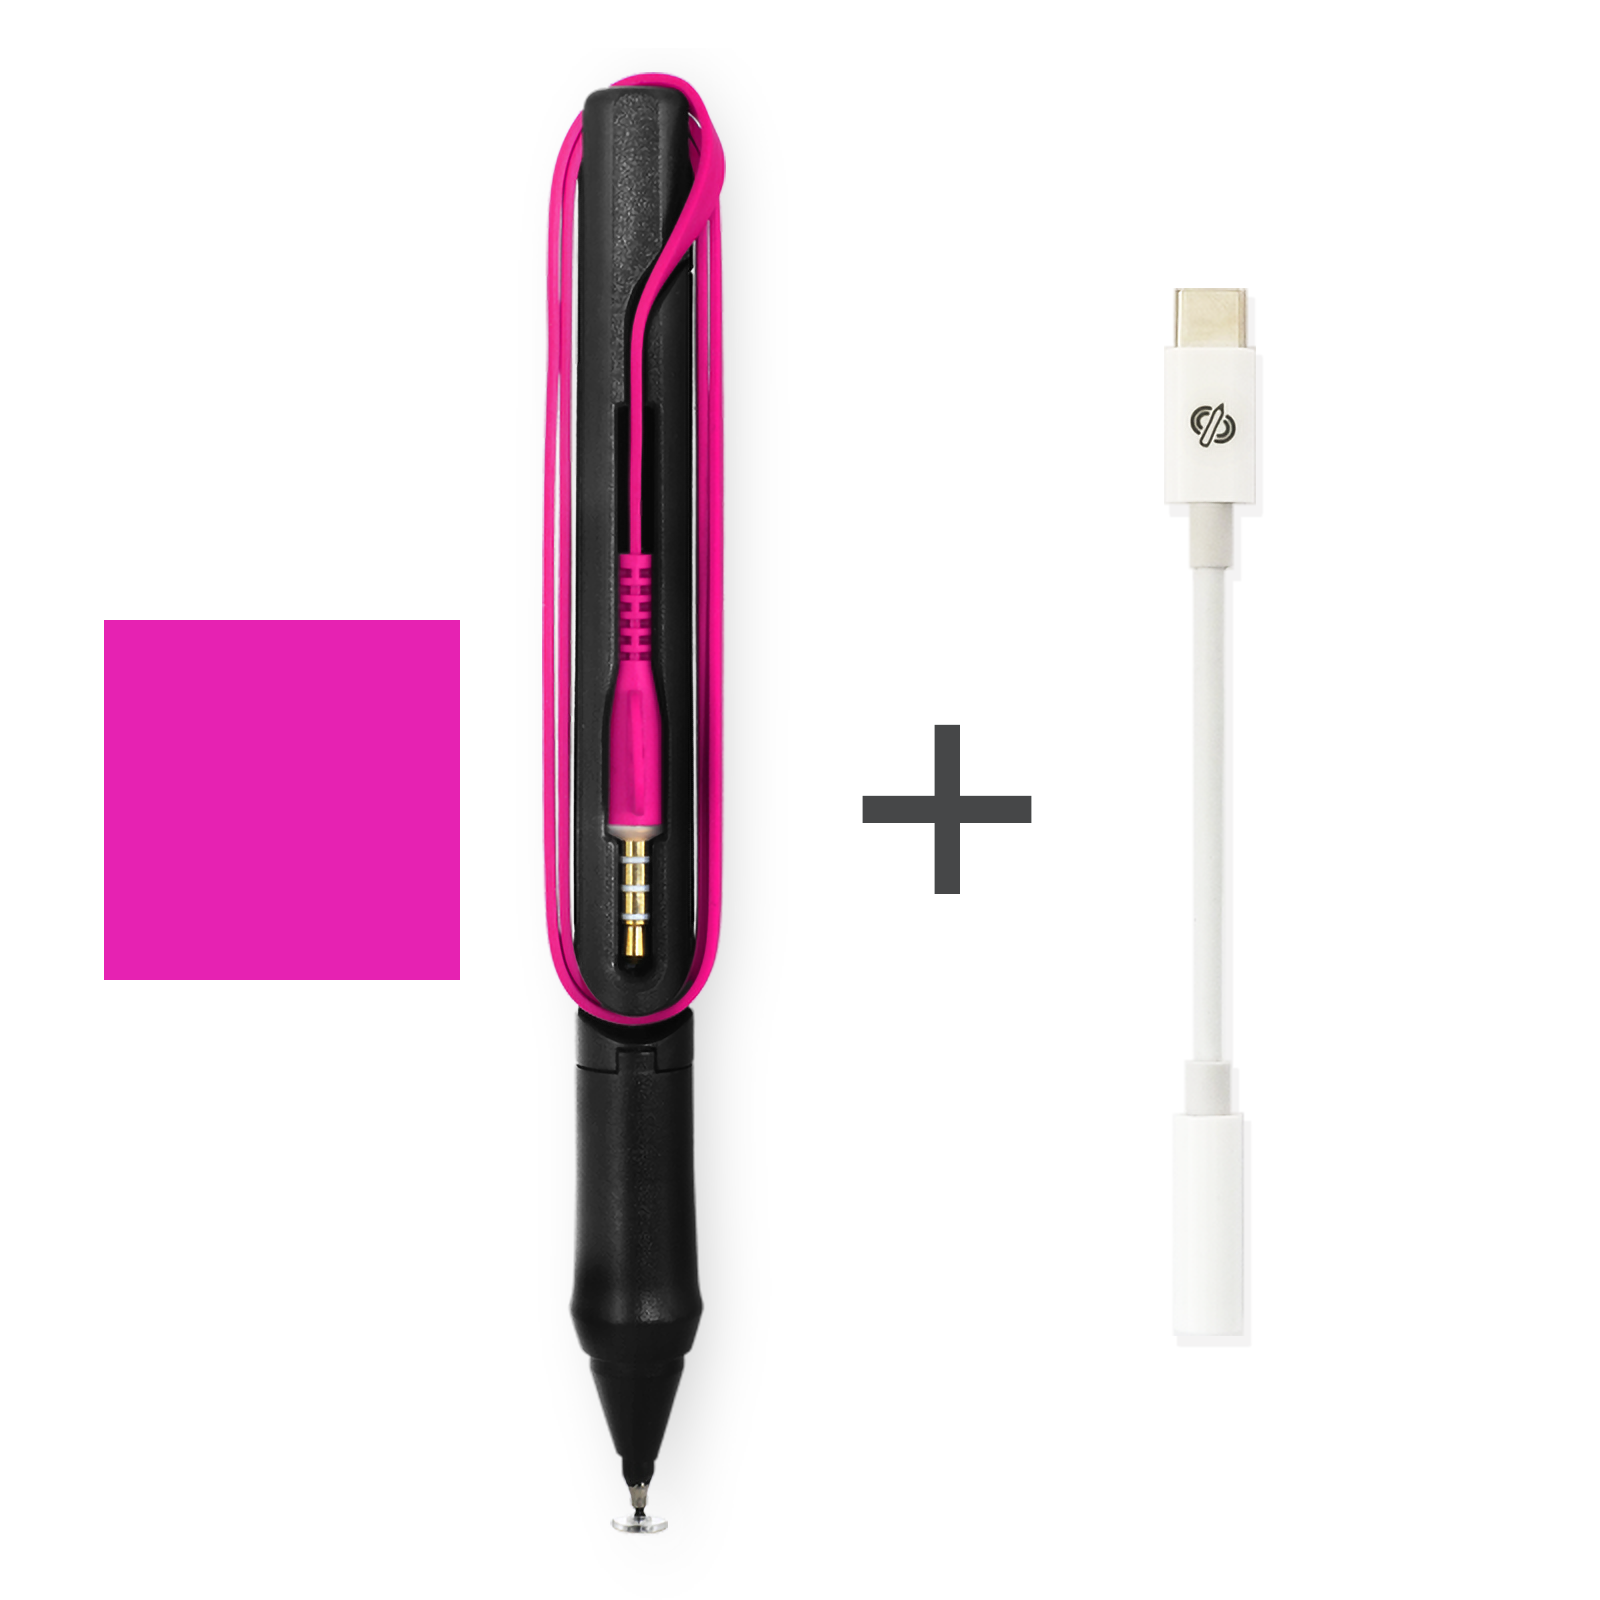 (RARE) Sonar Pen stylus (pink)- usable for Android & iOS